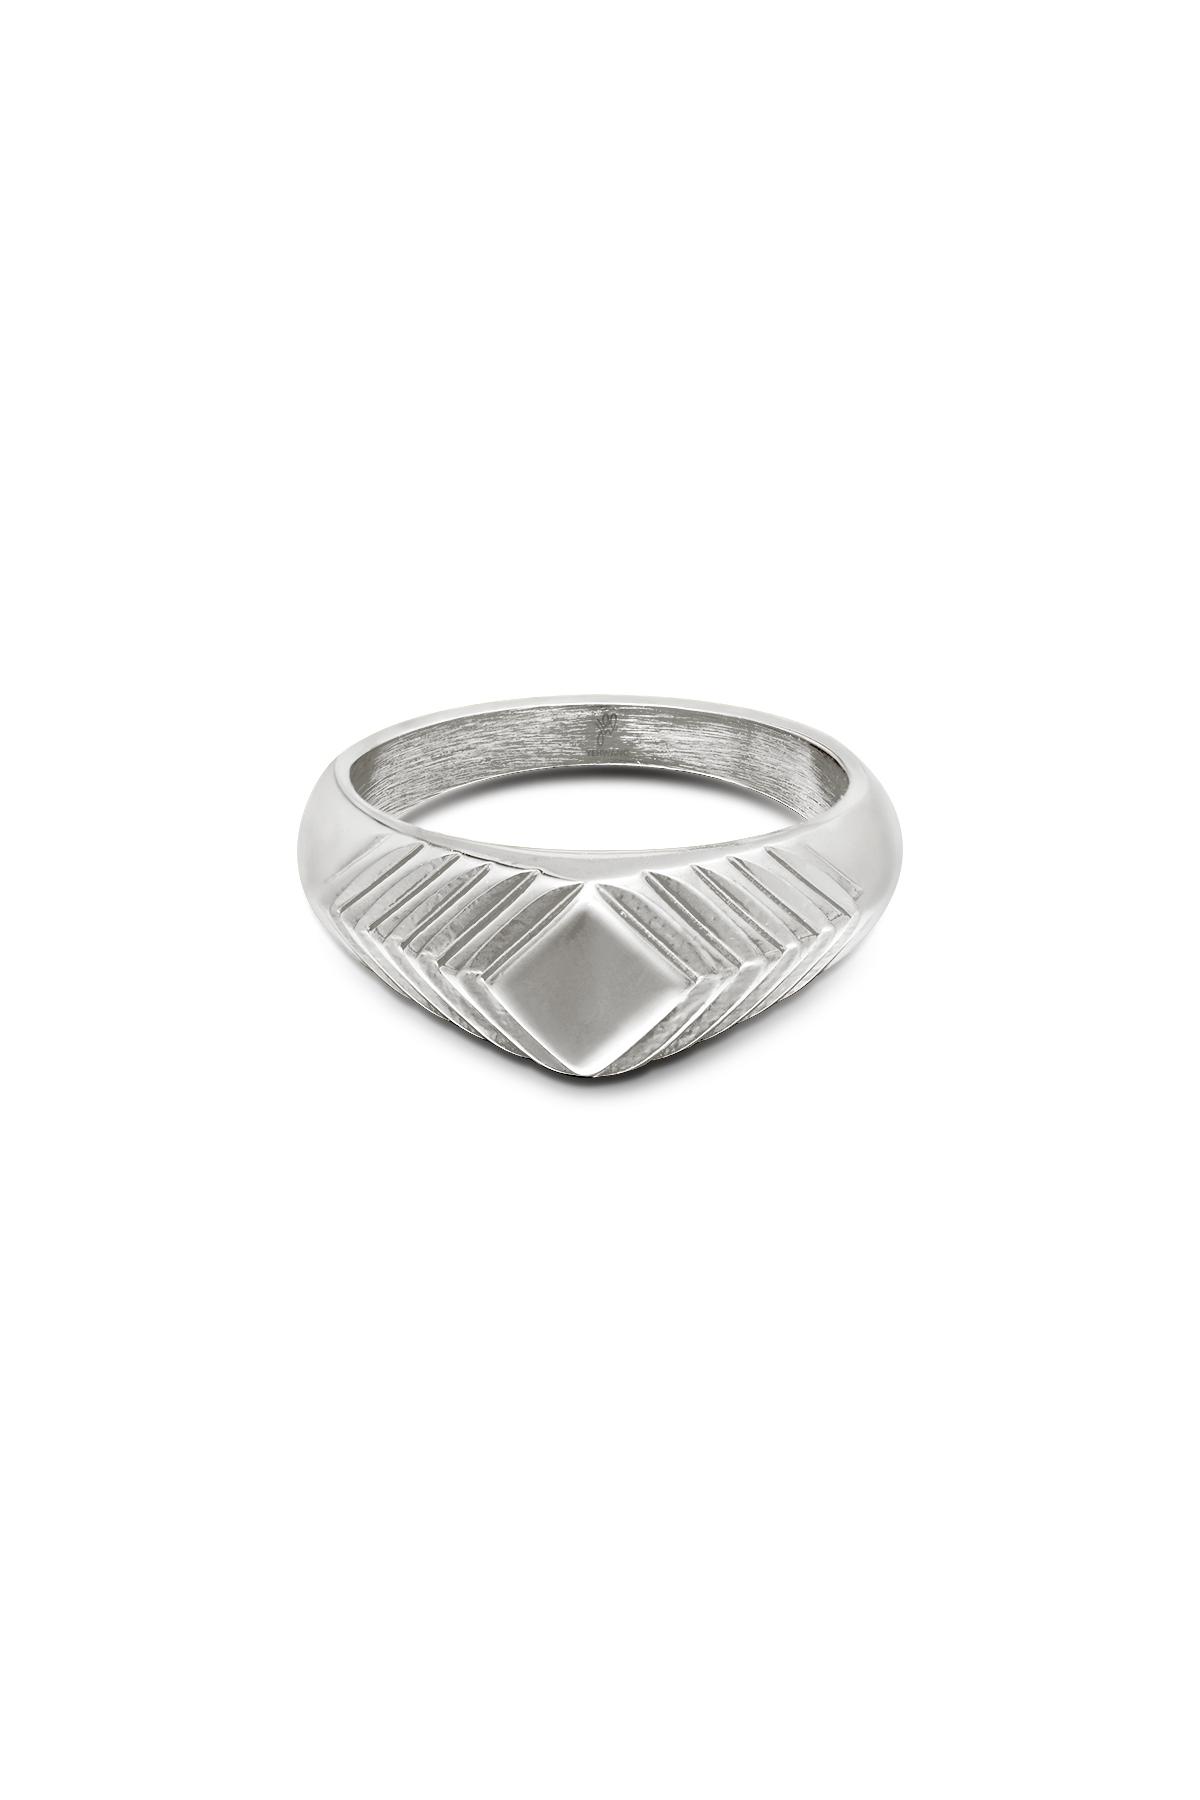 Ring Lydia Zilver Stainless Steel 17 h5 